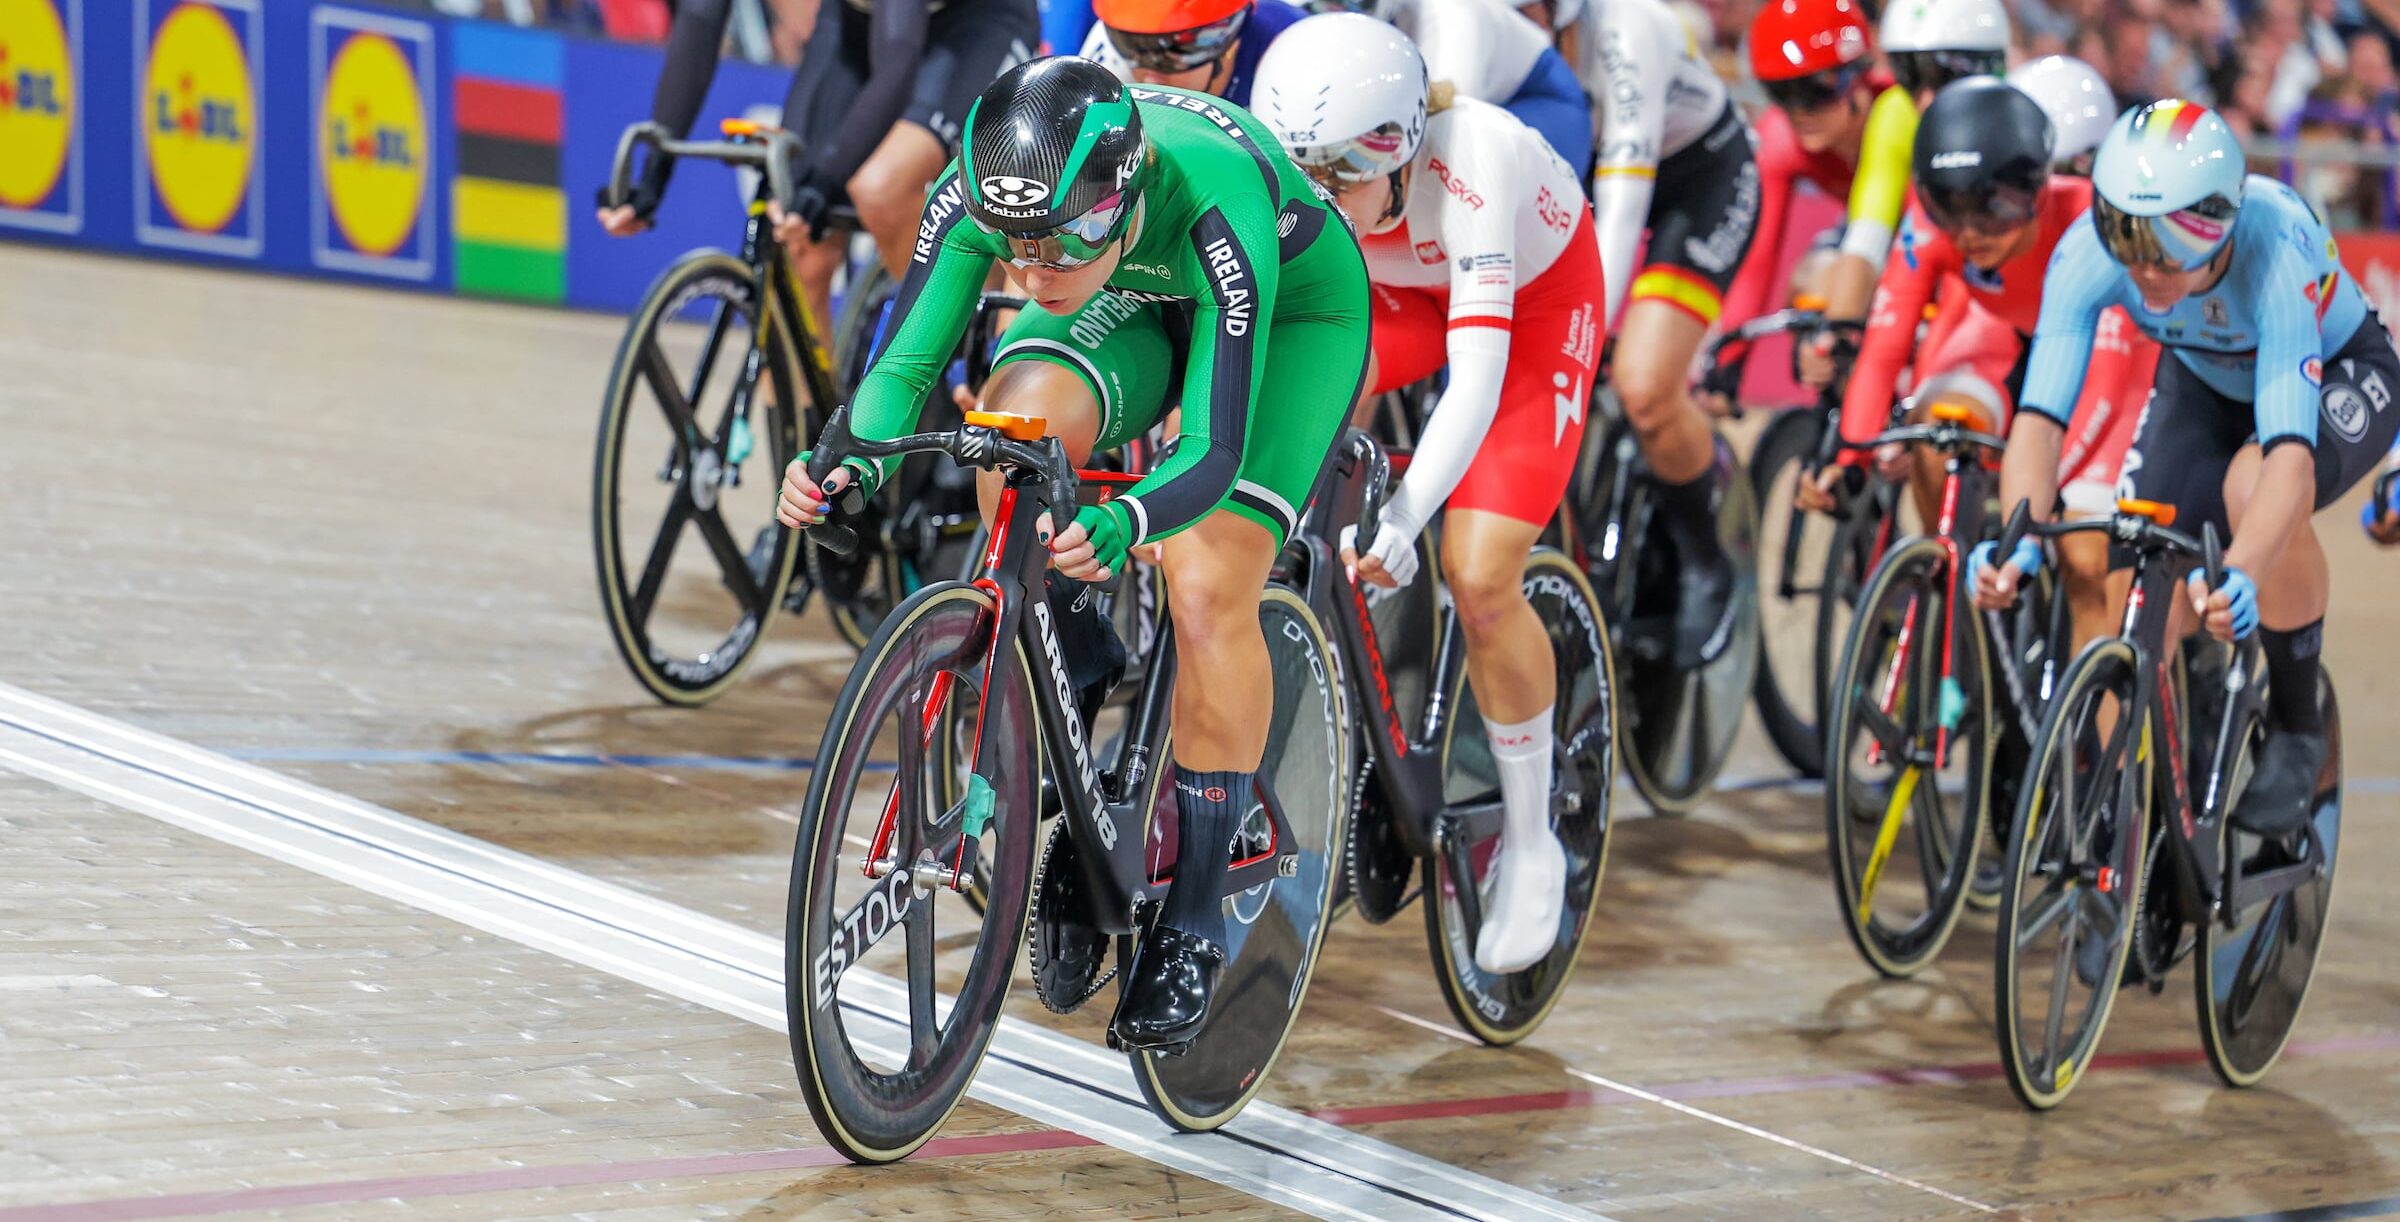 Cycling Ireland opens European Track Champs selection towards Olympics